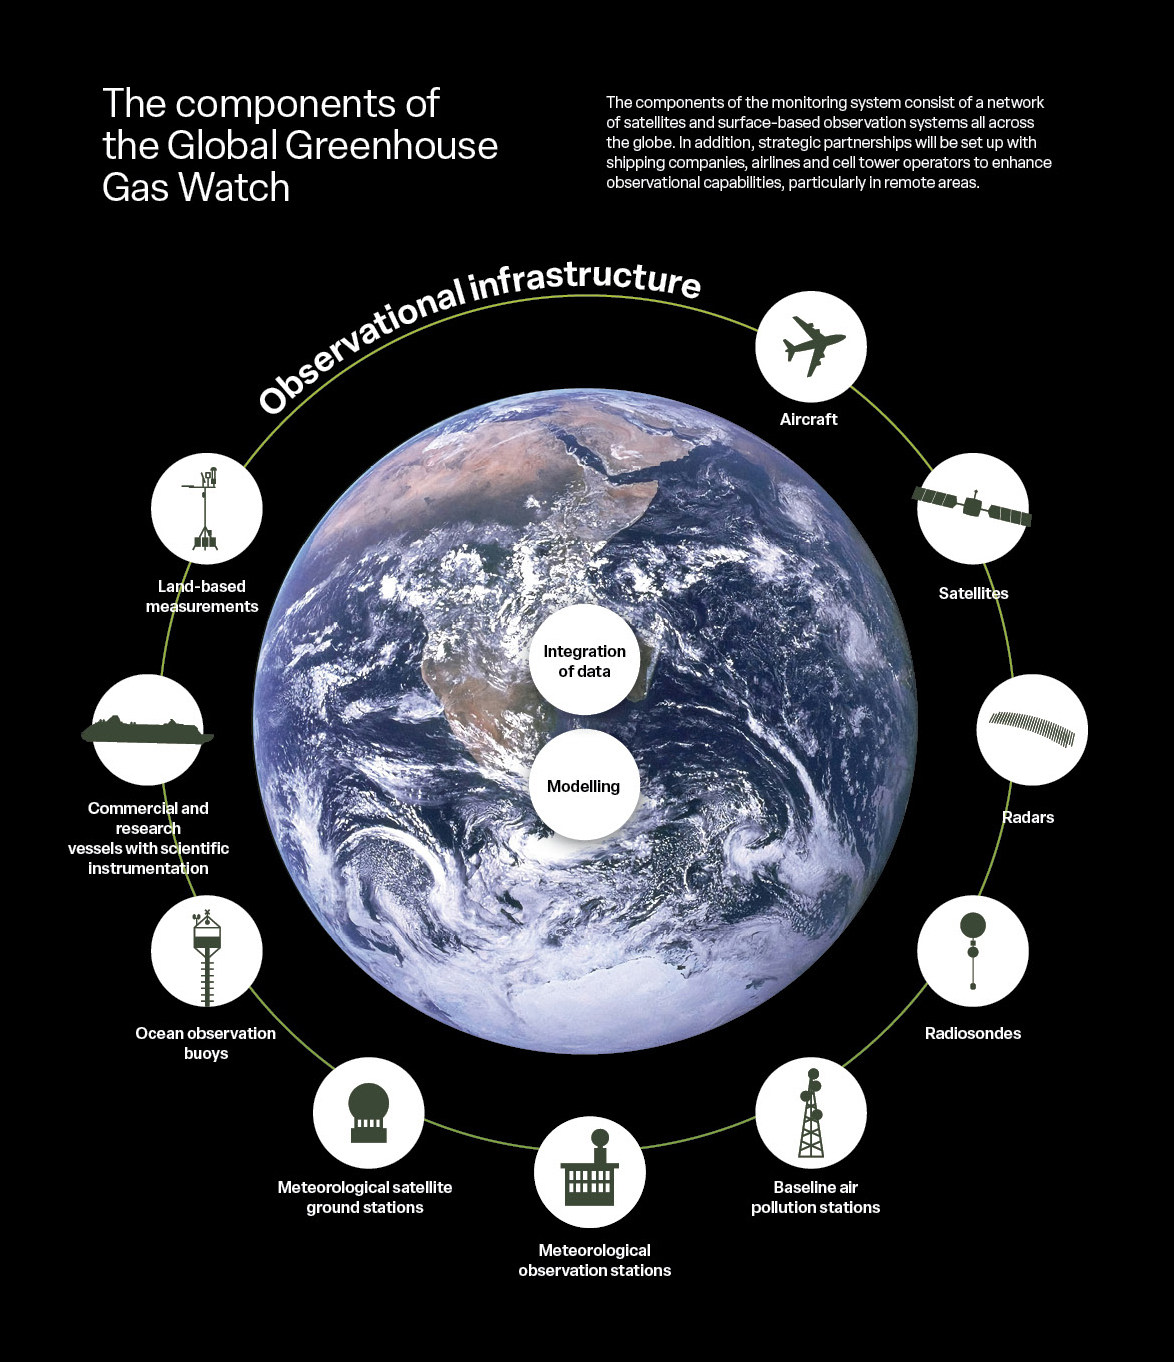 The components of the Global Greenhouse Gas Watch